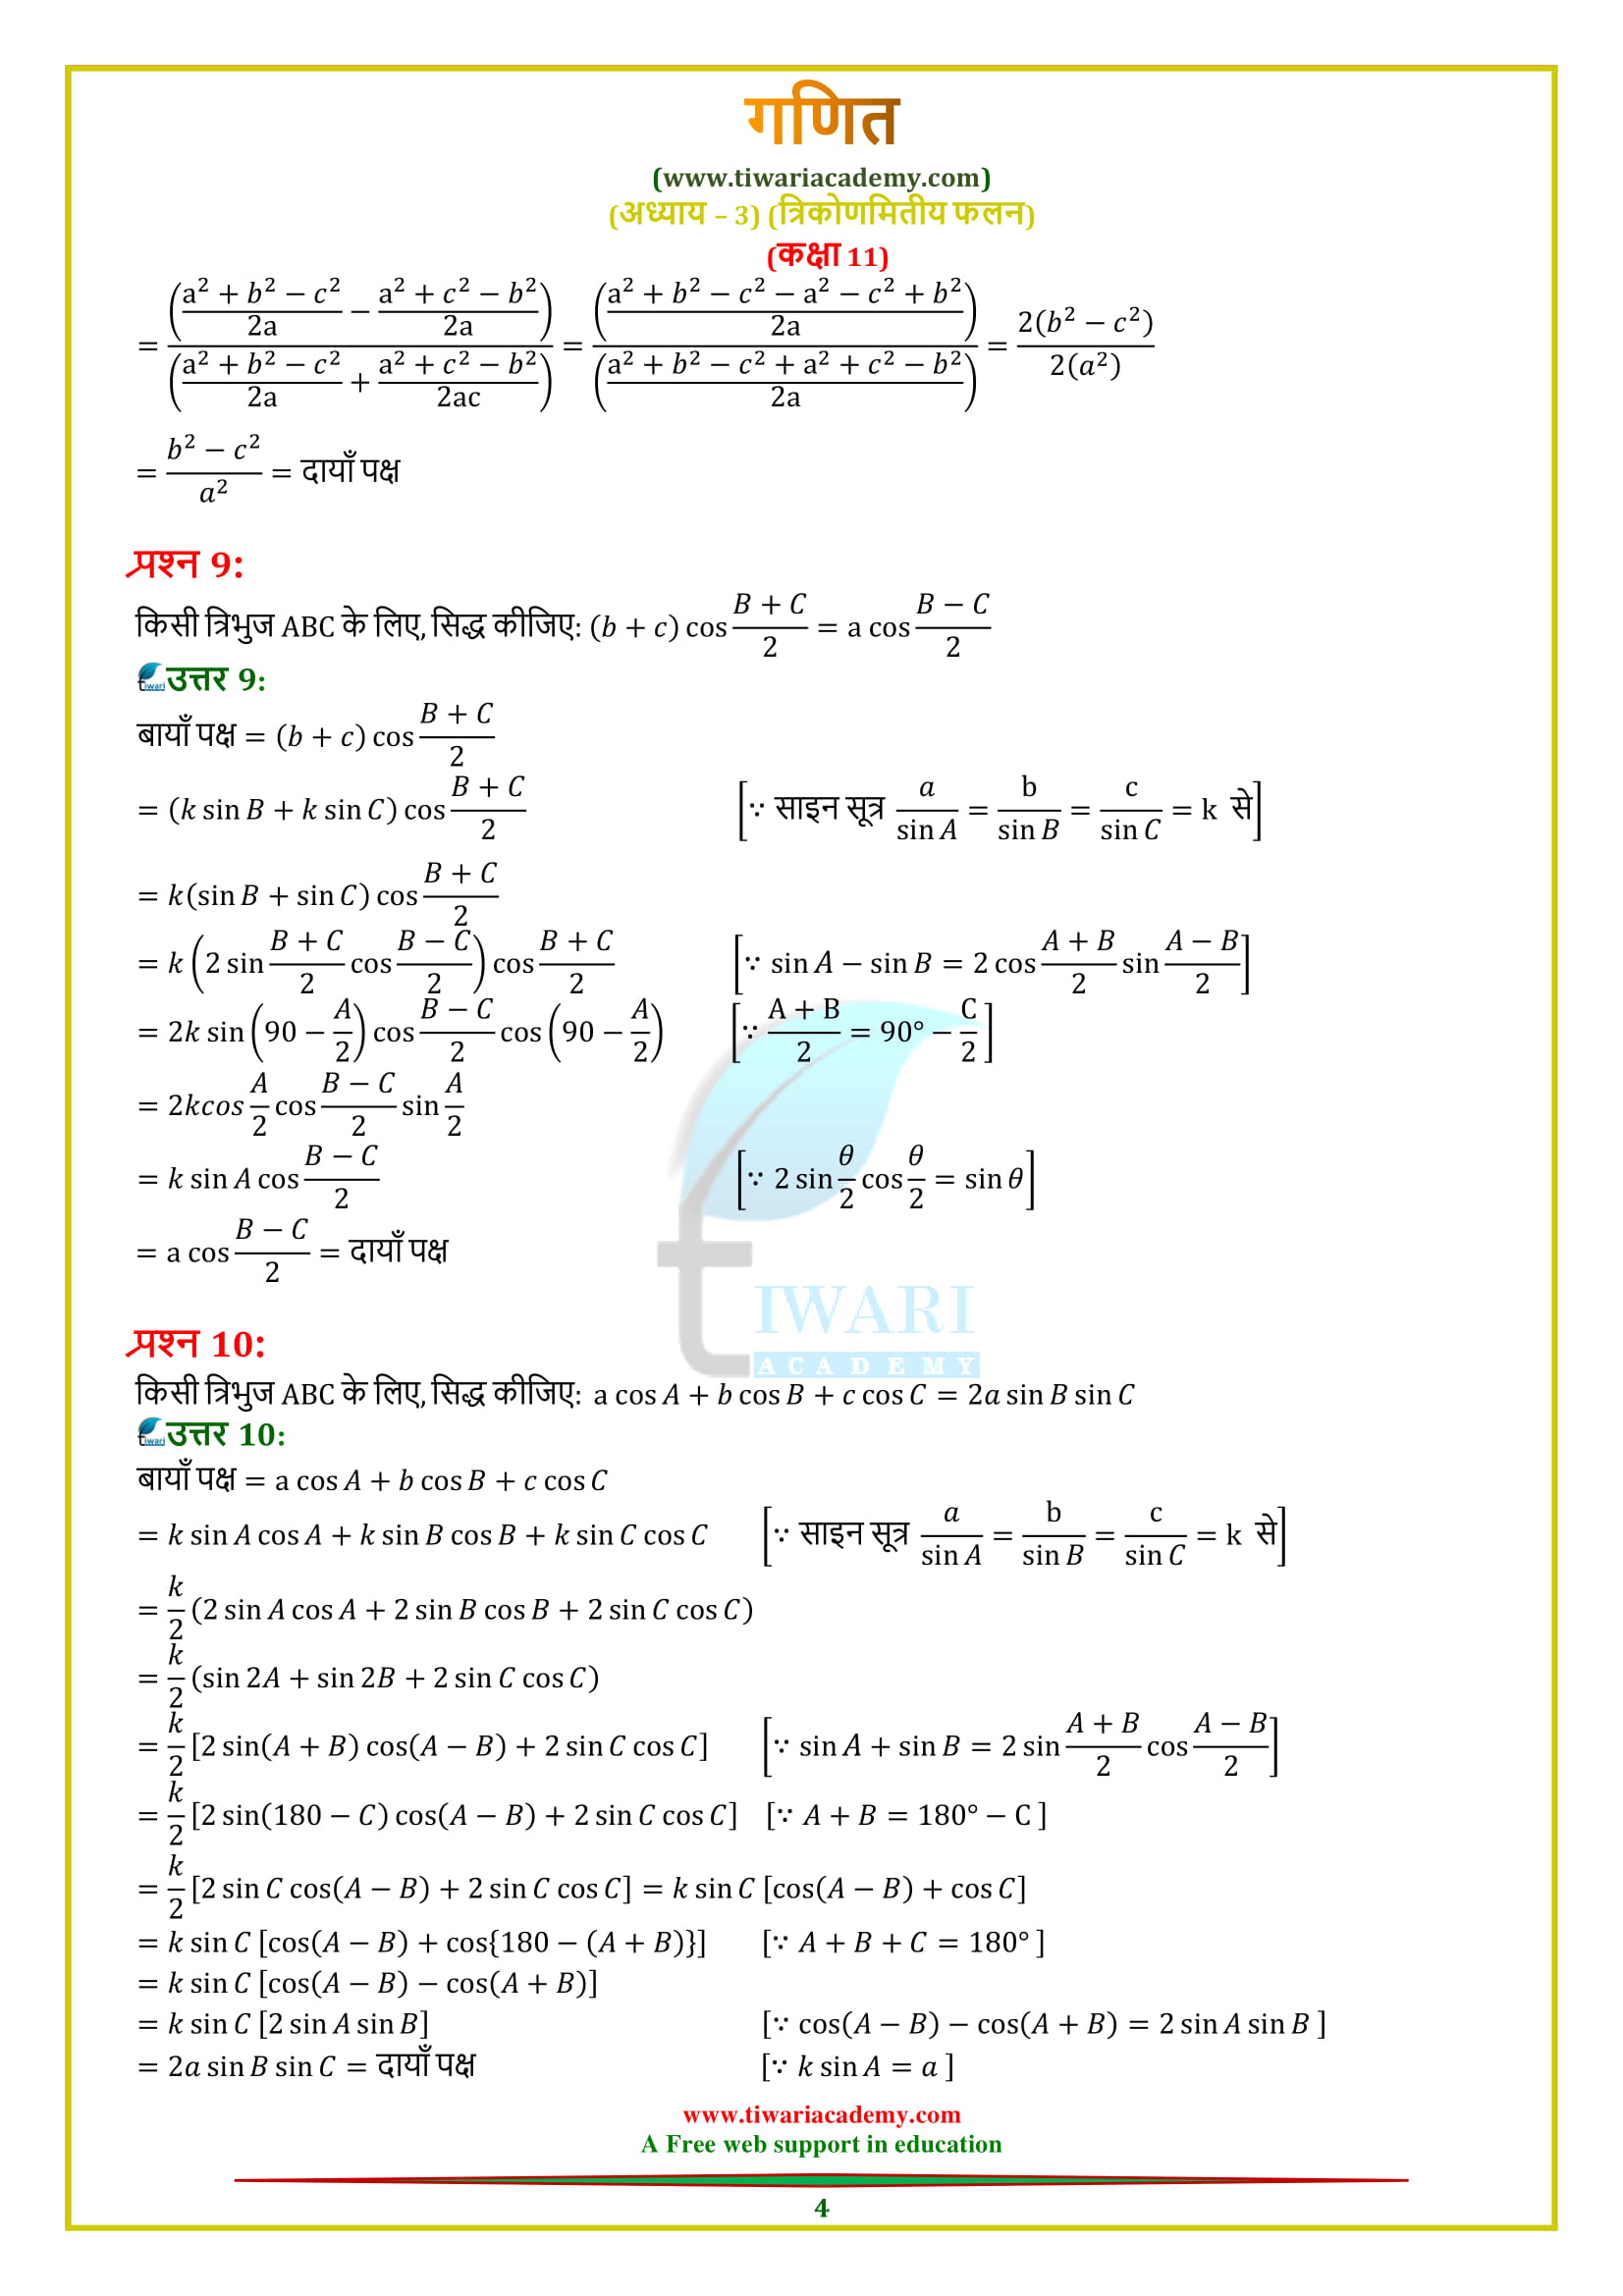 11 Maths Chapter 3 Exercise 3.5 questions 1, 2, 3, 4, 5, 6, 7, 8, 9, 8, 9, 10